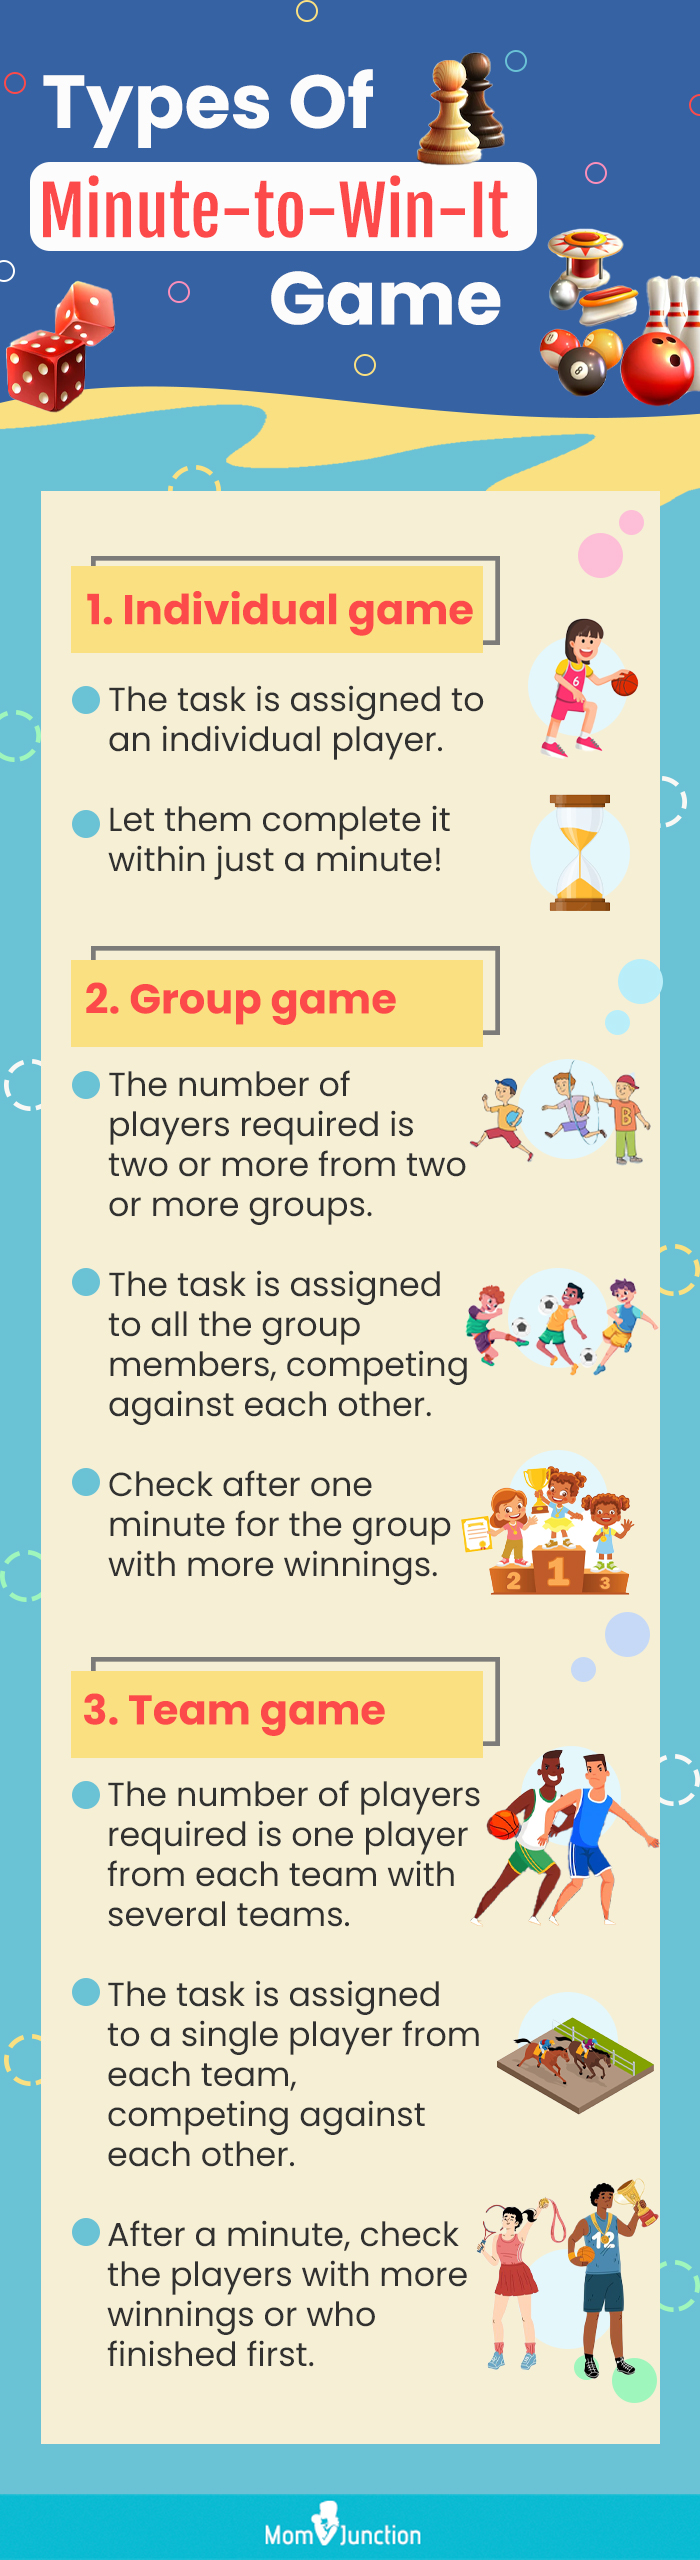 types of minute to win it game (infographic)